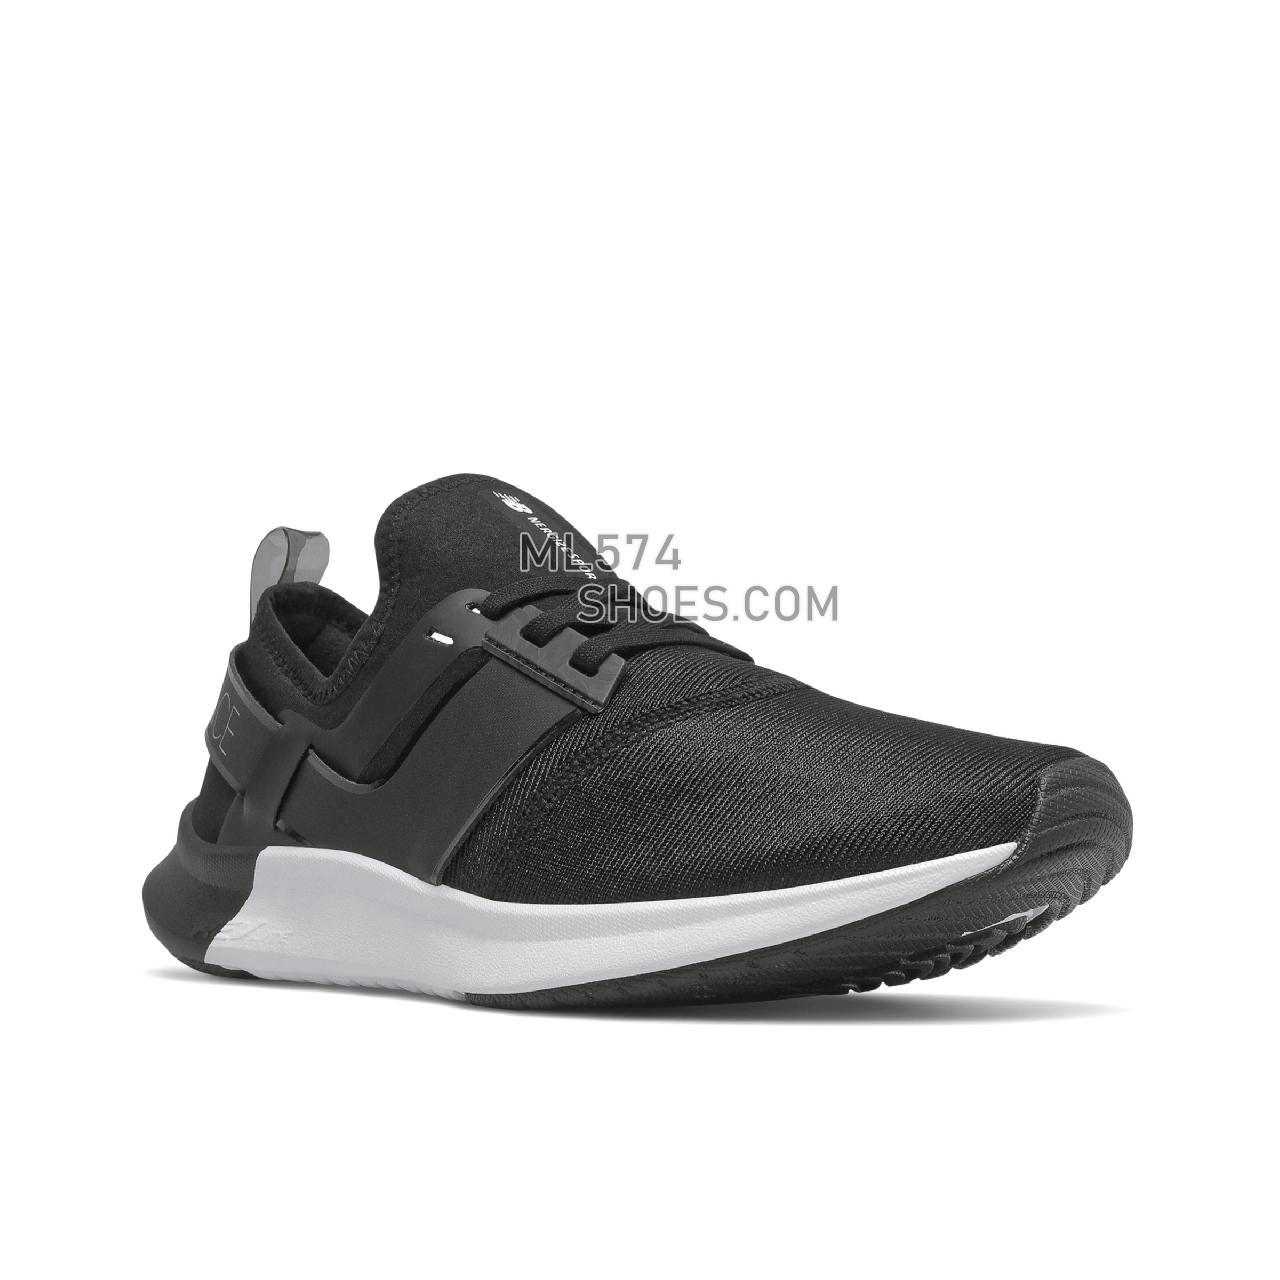 New Balance NB Nergize Sport LUX - Women's Sport Style Sneakers - Black with Whisper Grey - WNRGSEB1